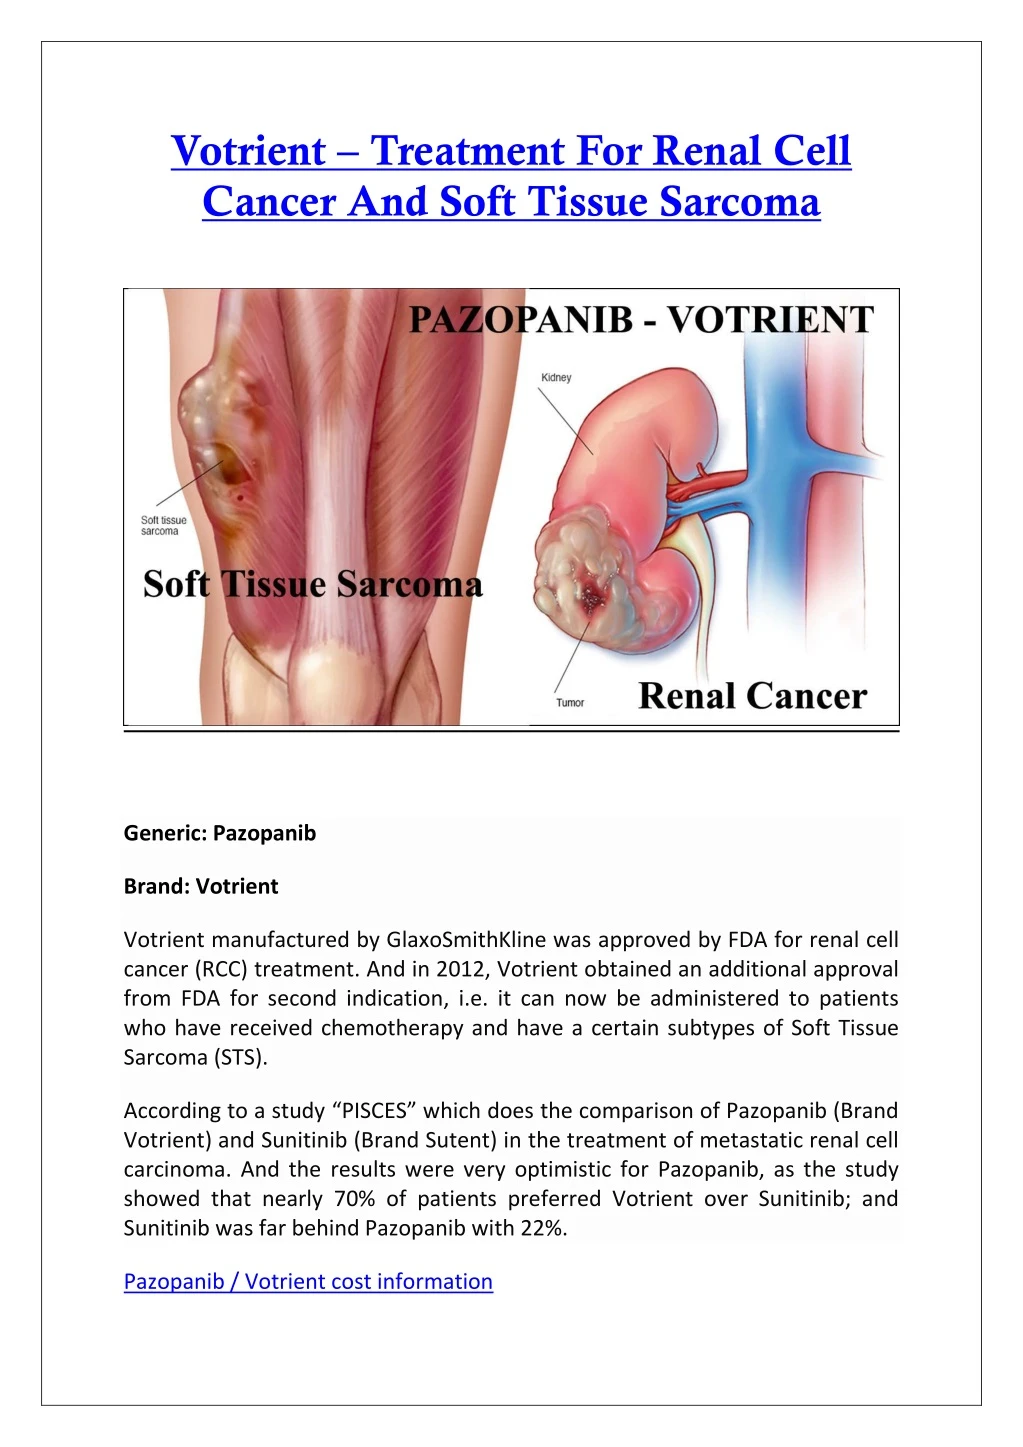 votrient treatment for renal cell cancer and soft